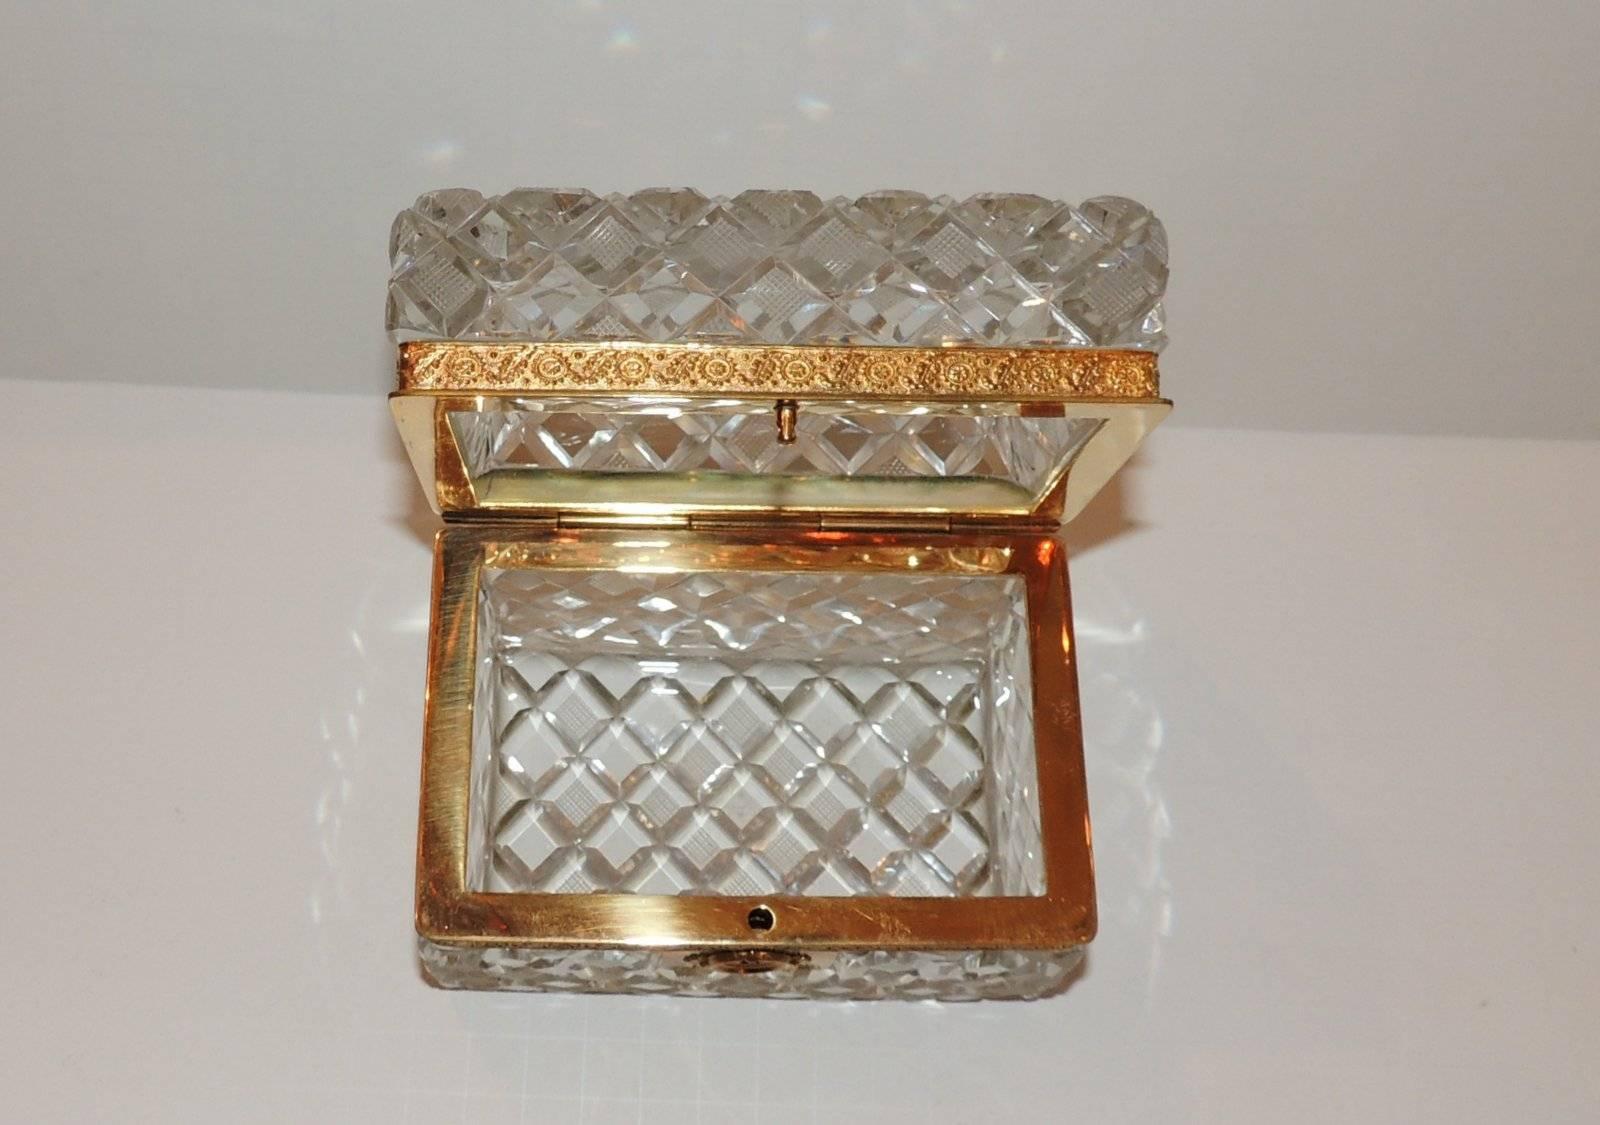 Wonderful French Faceted Cut Crystal Bronze Ormolu-Mounted Casket Jewelry Box 1